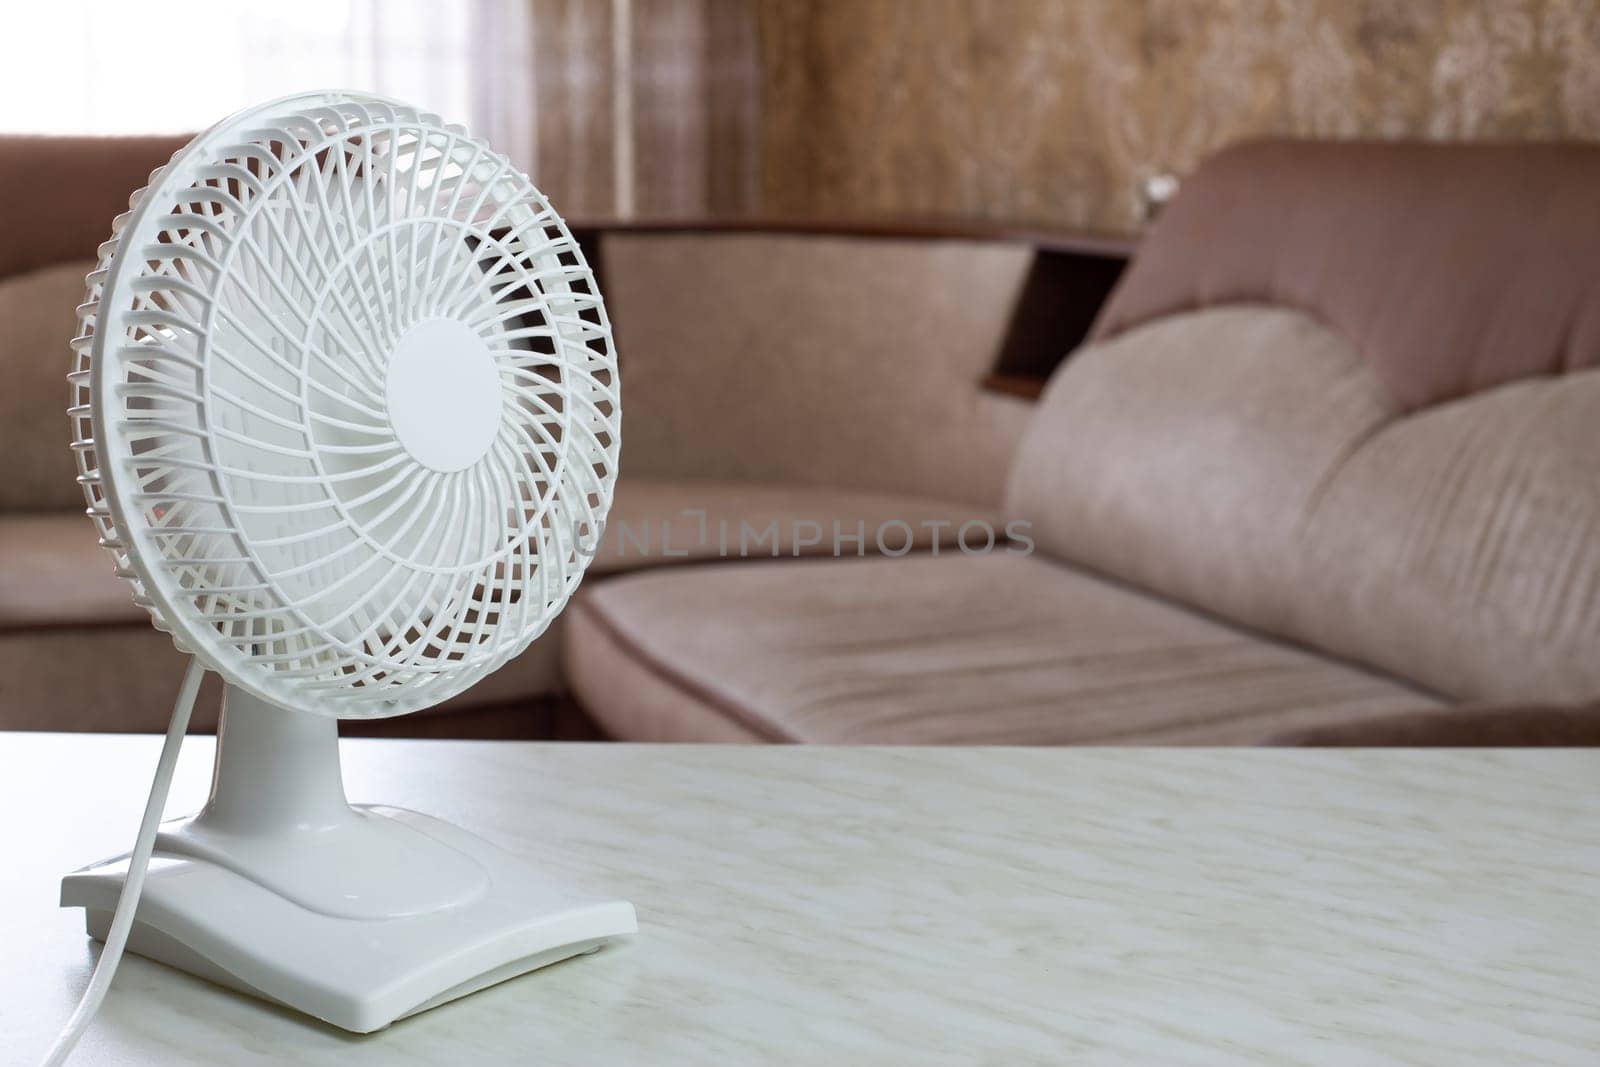 Tabletop white fan disperses cold air throughout the home room by timurmalazoniia